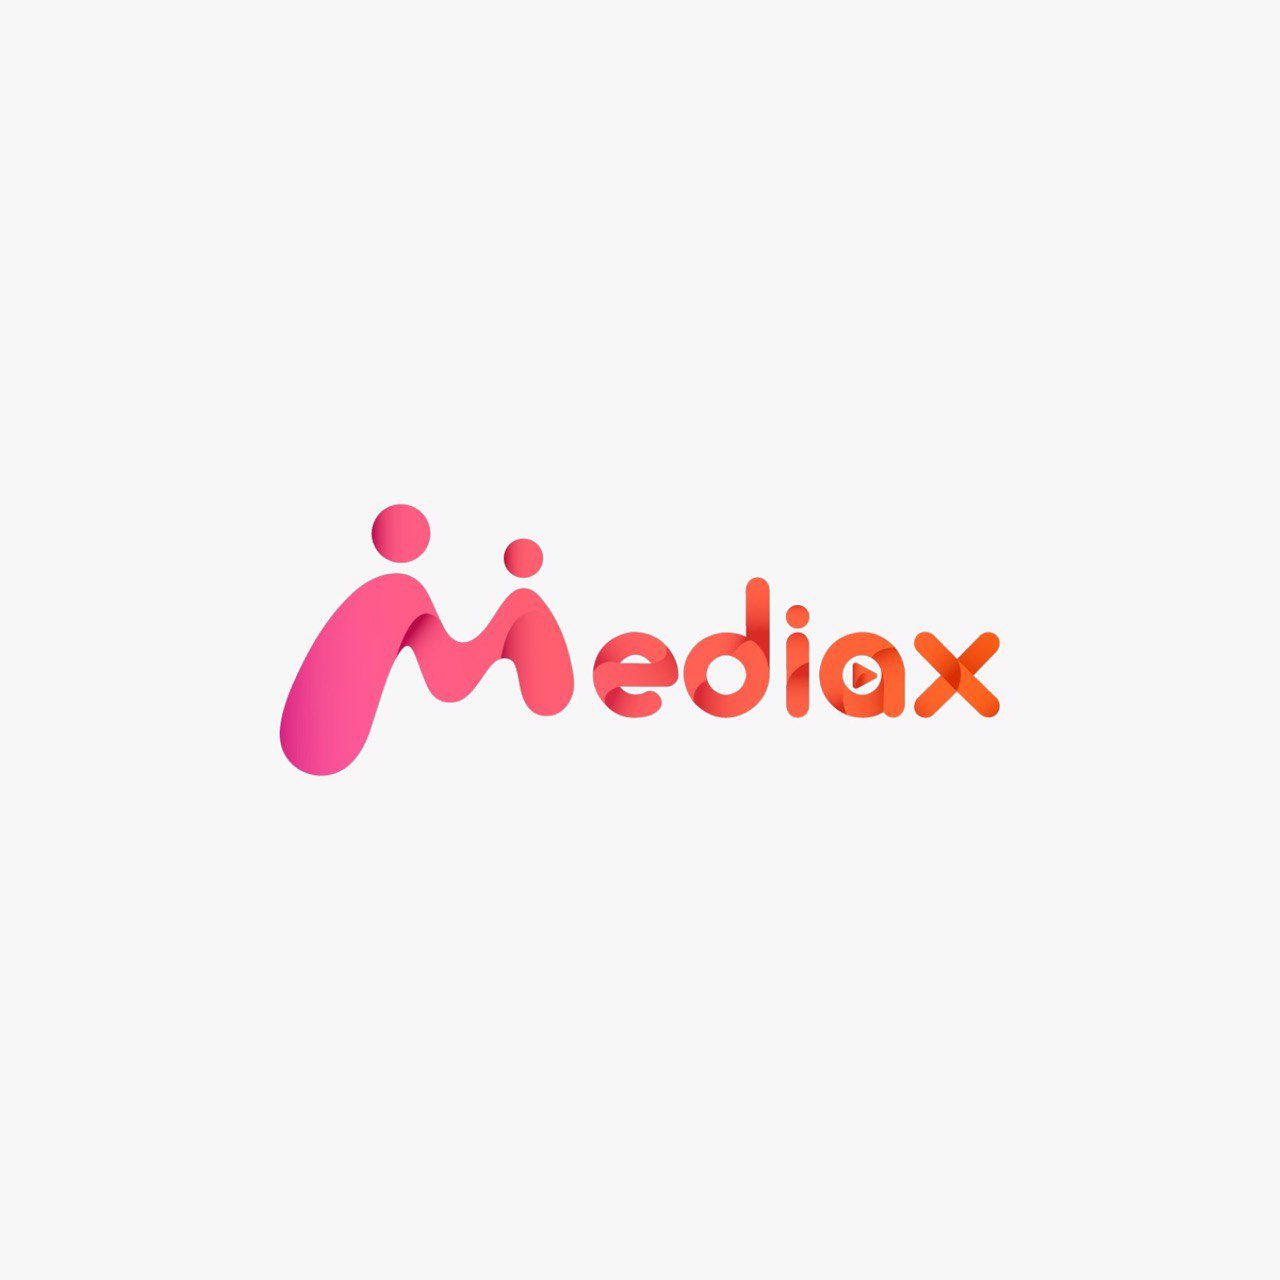 , MediaX Agency, #1 PR Agency, ready to provide PR services to Web 3.0 and MetaVerse projects